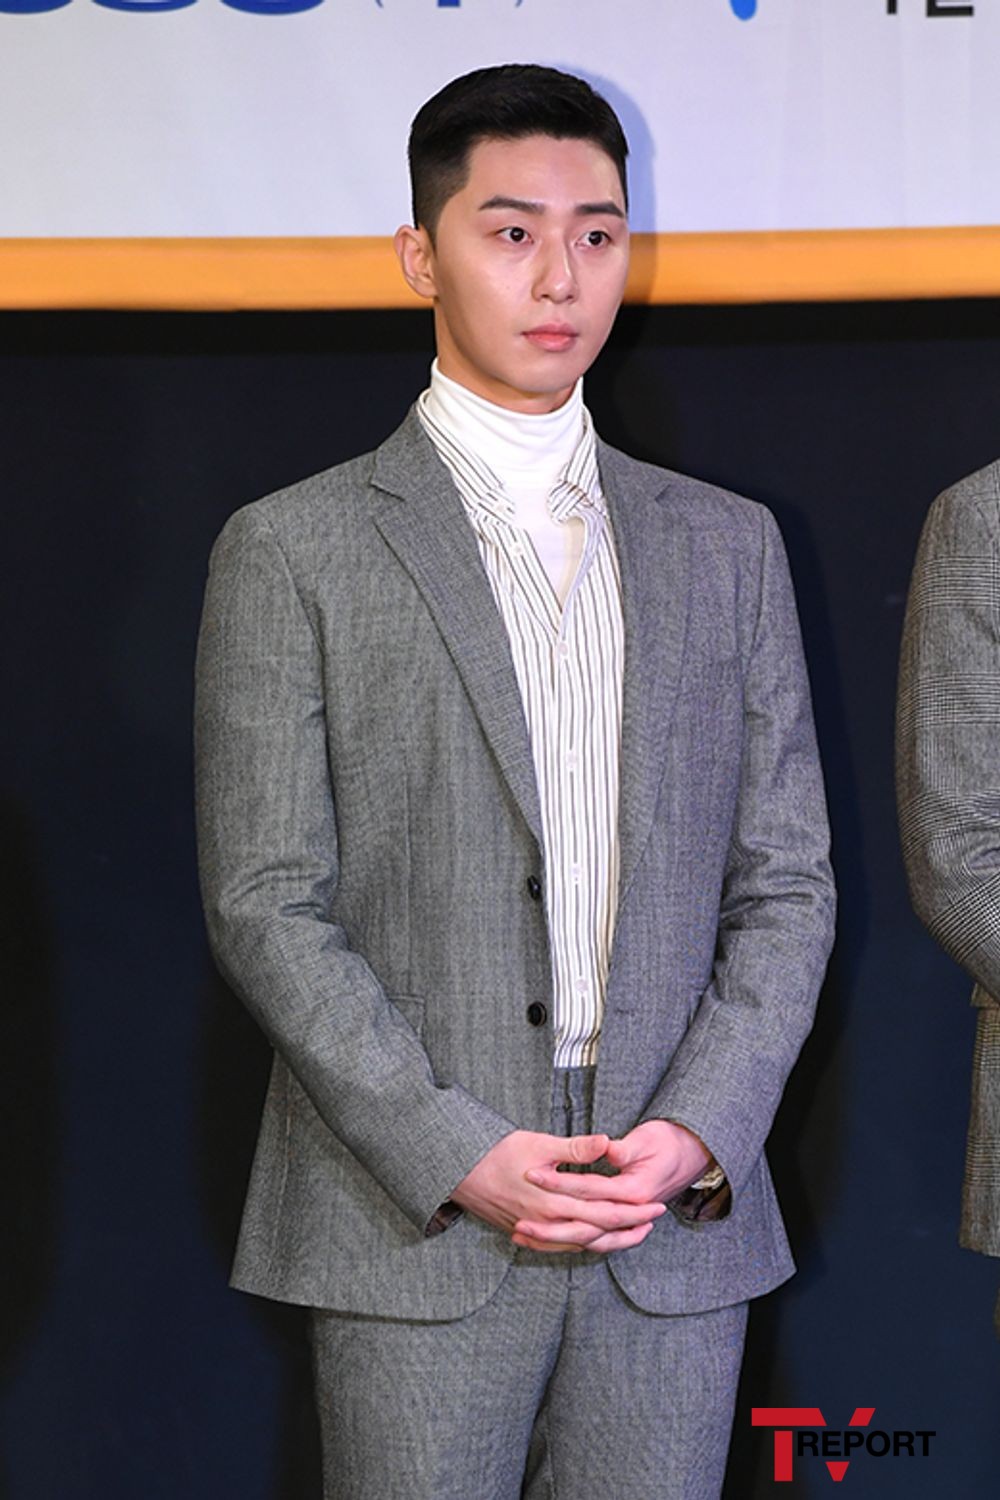 Actor Park Seo-joon attends the ceremony for the delivery of the fashion company, Shinsung Trade Fever of On air Donation, held at the Basrak Hall in Seoul, Taepyeong-ro, Jung-gu, Seoul on the morning of the 15th.Shin Sung-sang pledged the Donation of Fever of On air worth about 150 million won at the ceremony. On air delivered to 29 food bank market centers in 25 boroughs through the Seoul Metropolitan Food Bank Center, which receives food and household goods with the Seoul Metropolitan Government and delivers them to difficult neighbors. .